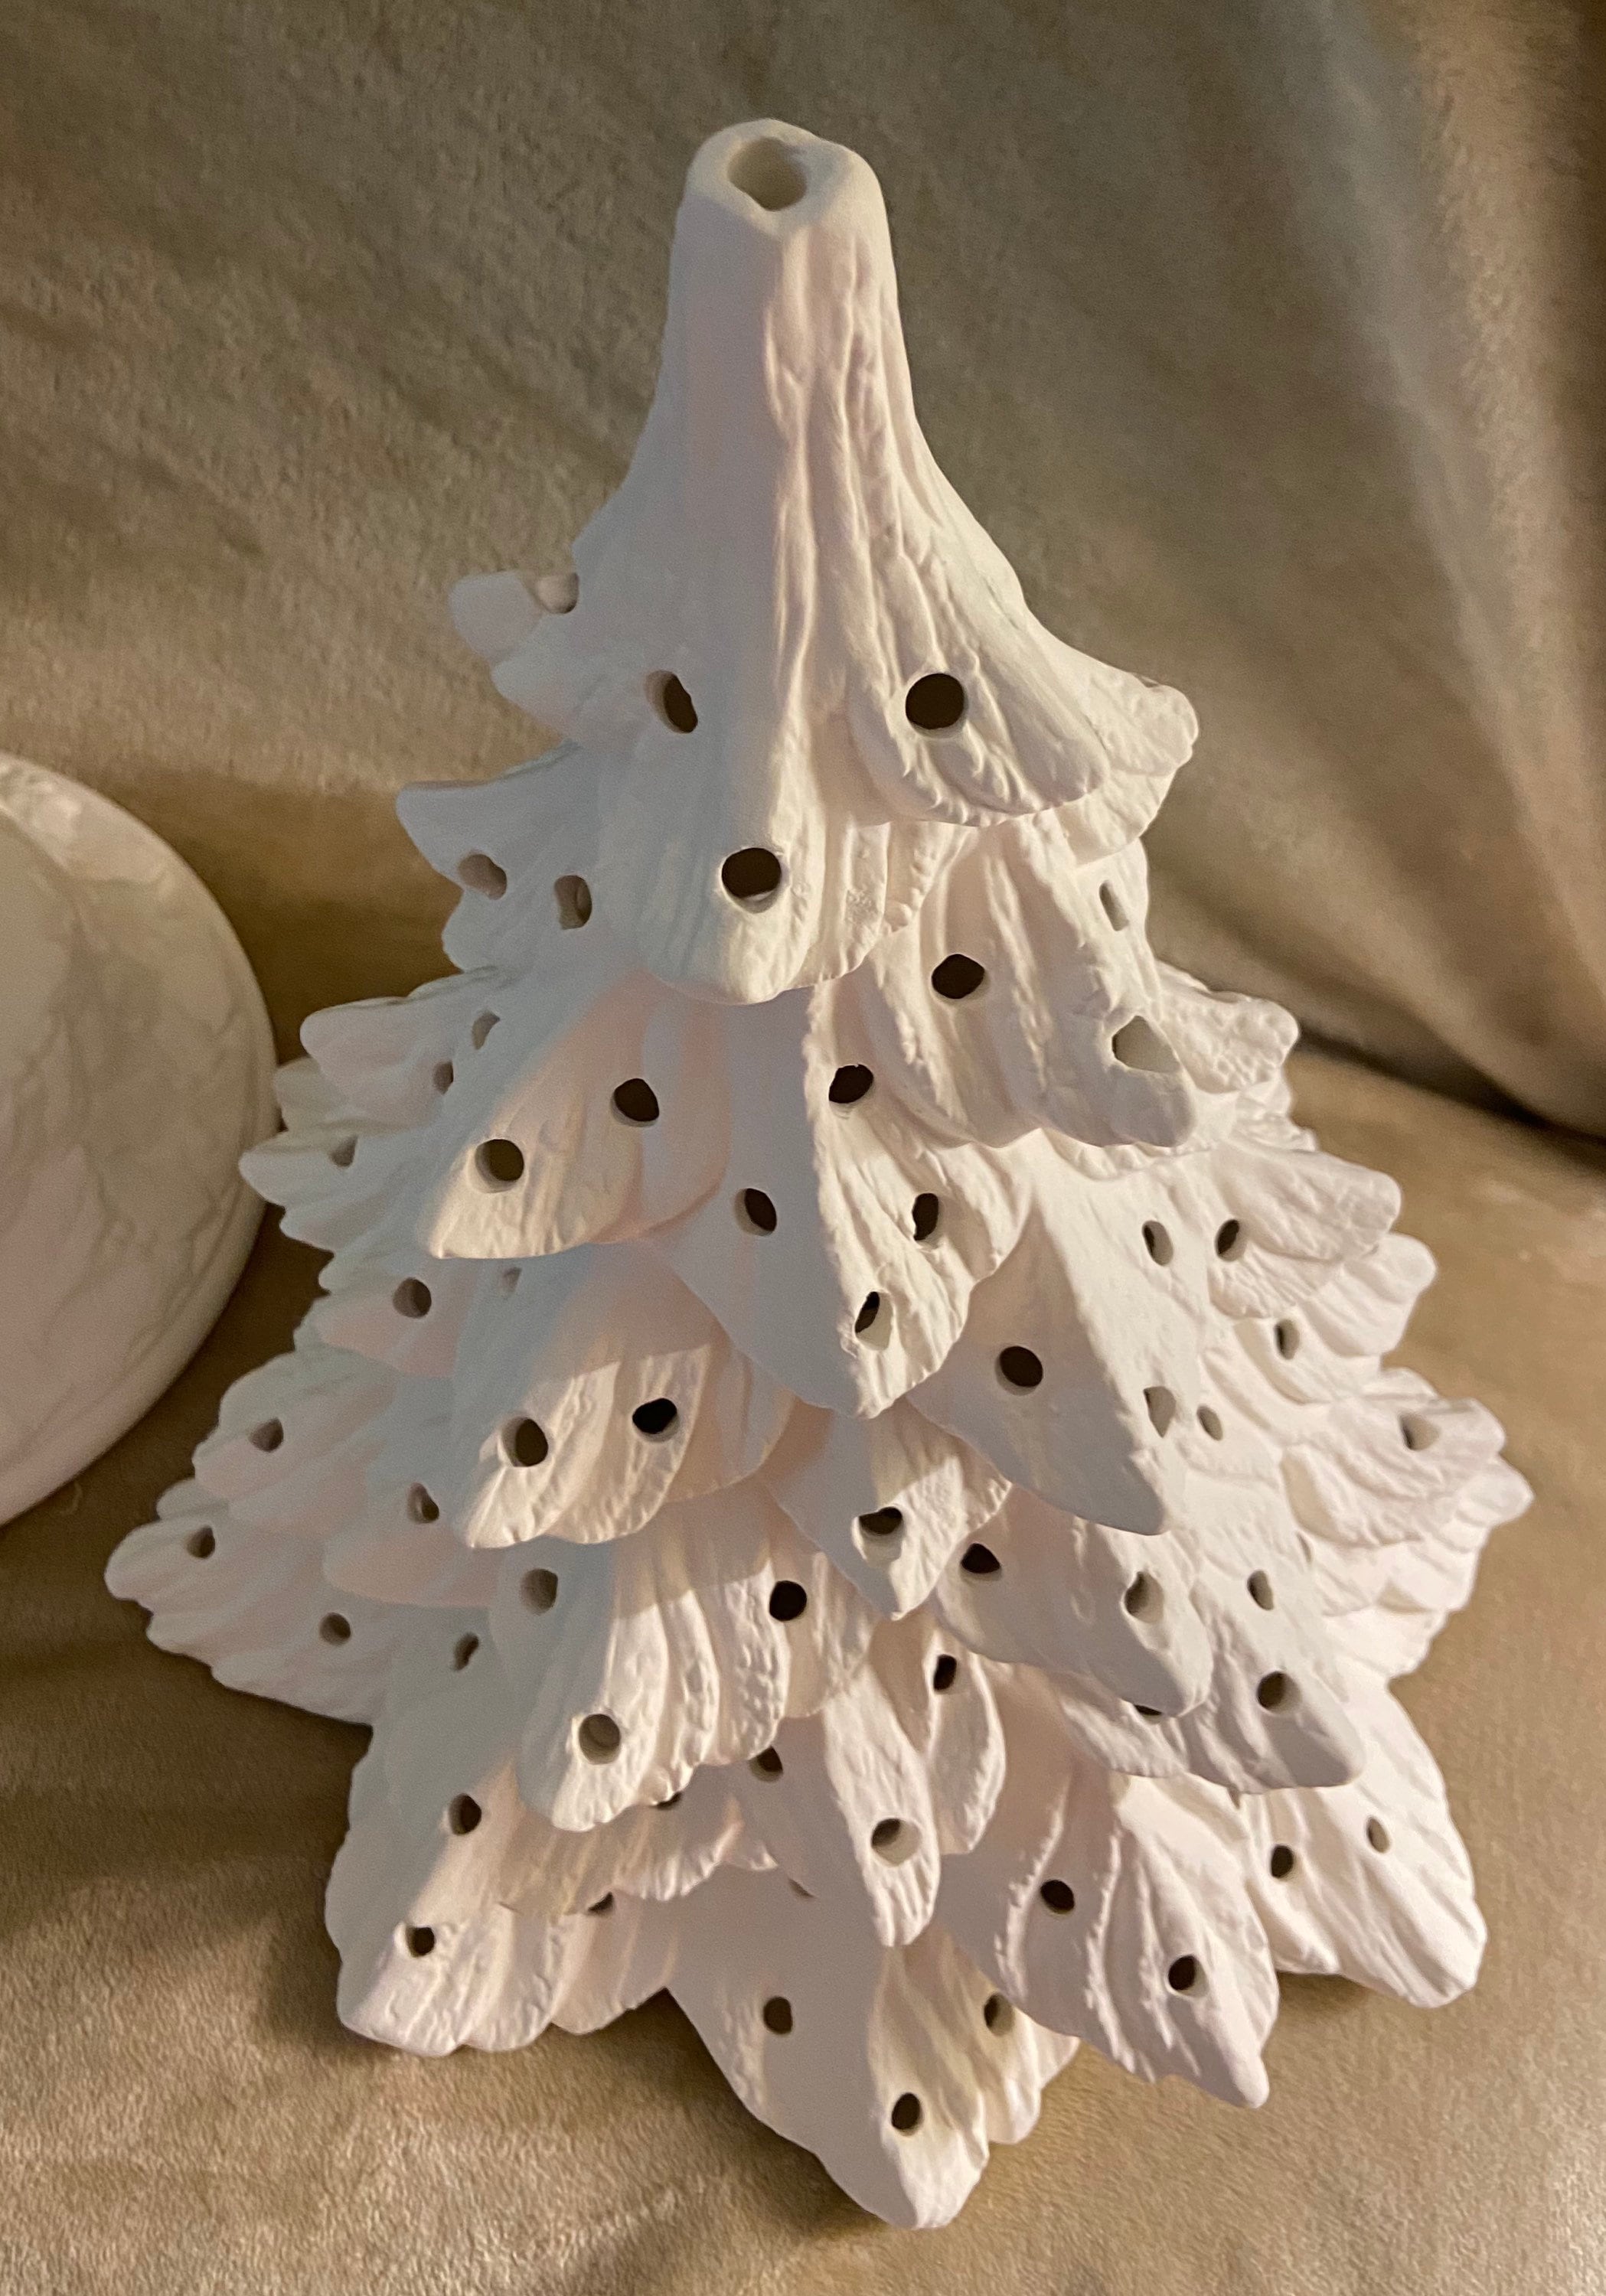 Ceramic Bisque You Paint, HUGE 23-24, Large, Ceramic Christmas tree,  Vintage Christmas tree, Tabletop Tree, Ready to paint — TS Originals,  Quality Ceramics